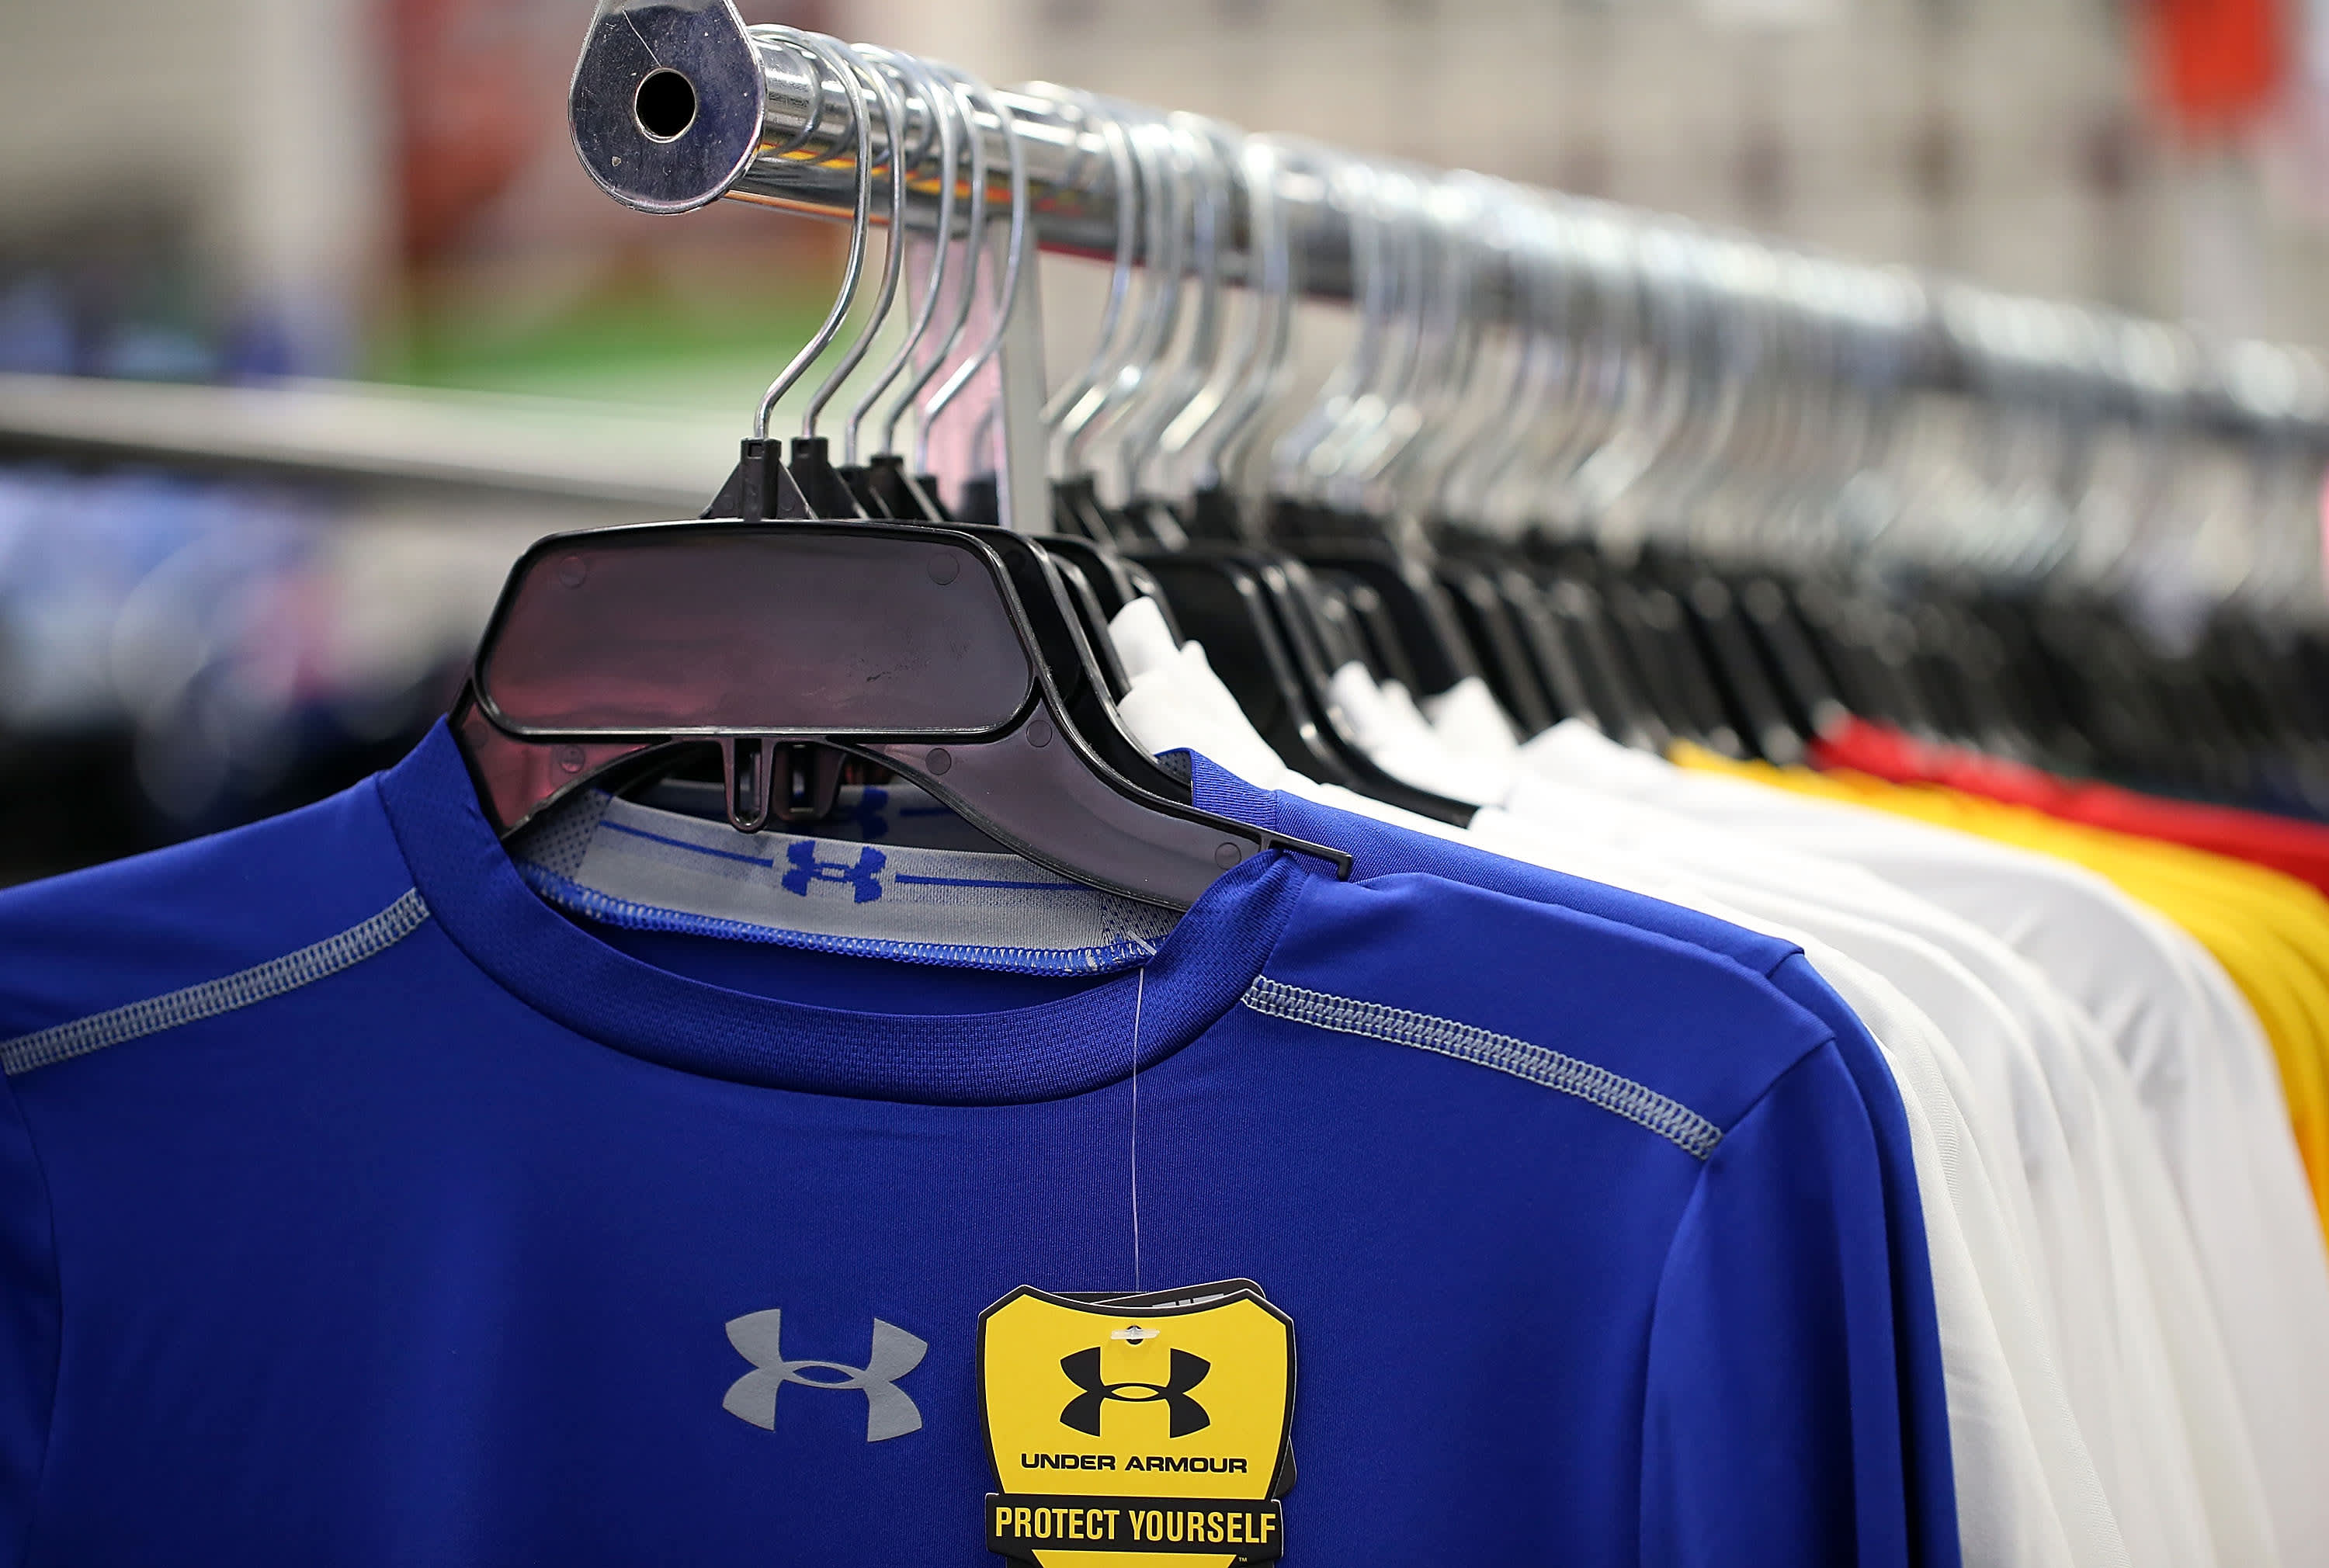 Under Armour (UAA) reports Q3 2021 earnings